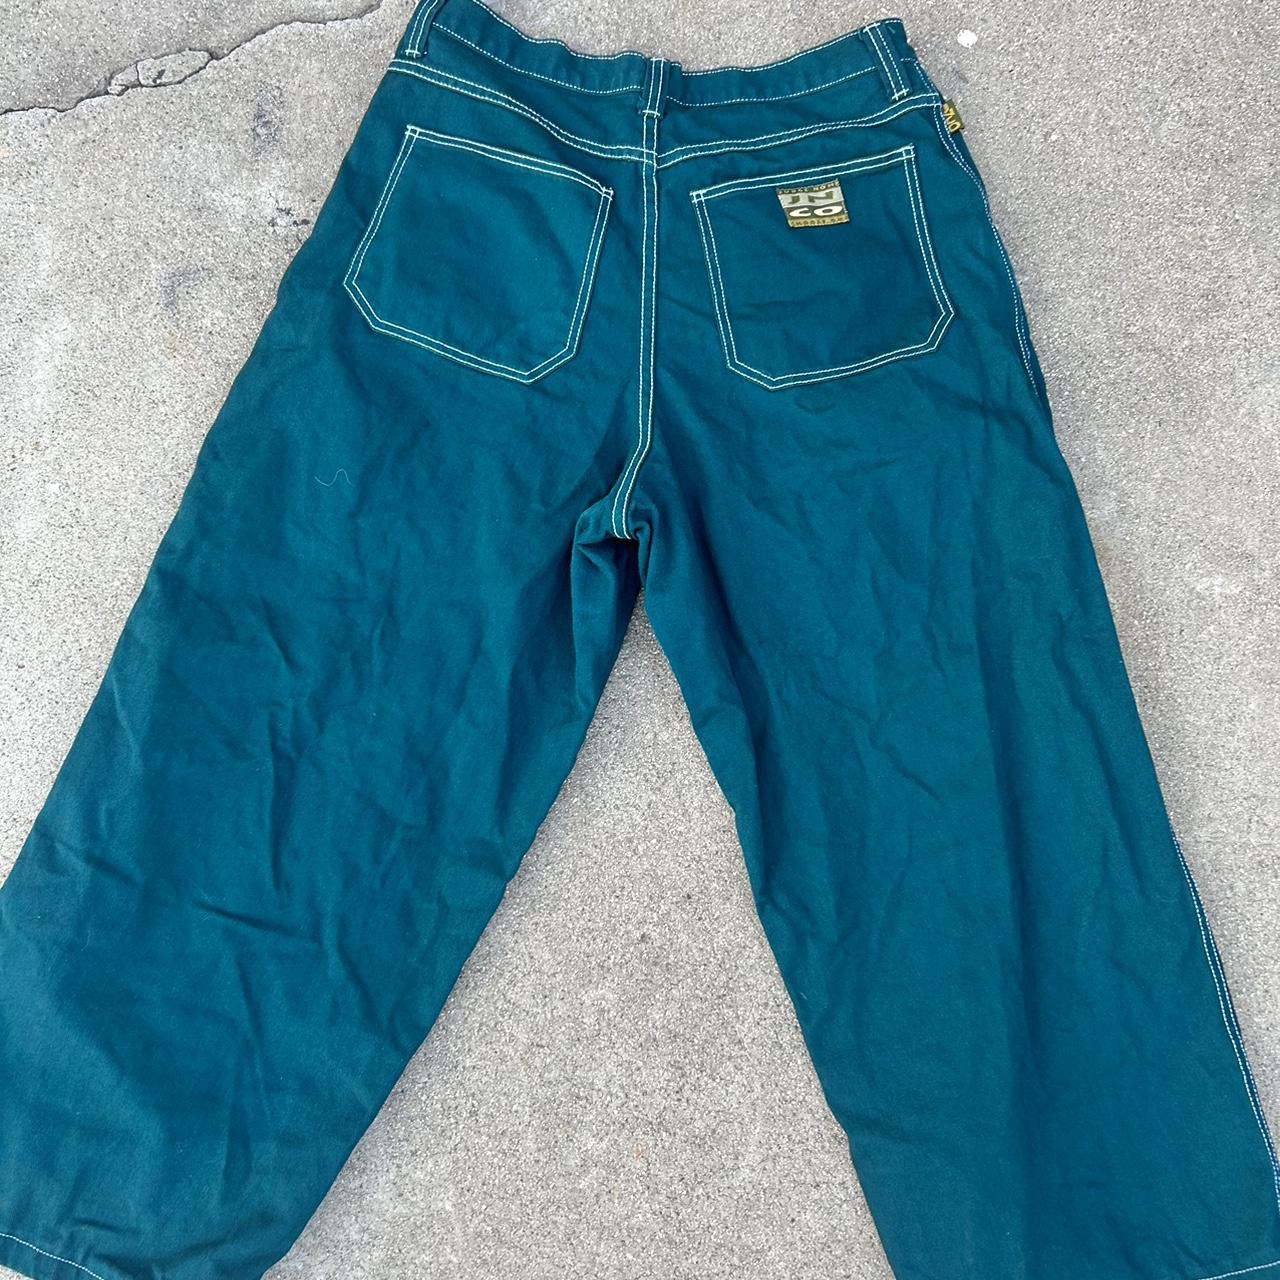 Very rare late 90s green, with white stitching jncos... - Depop